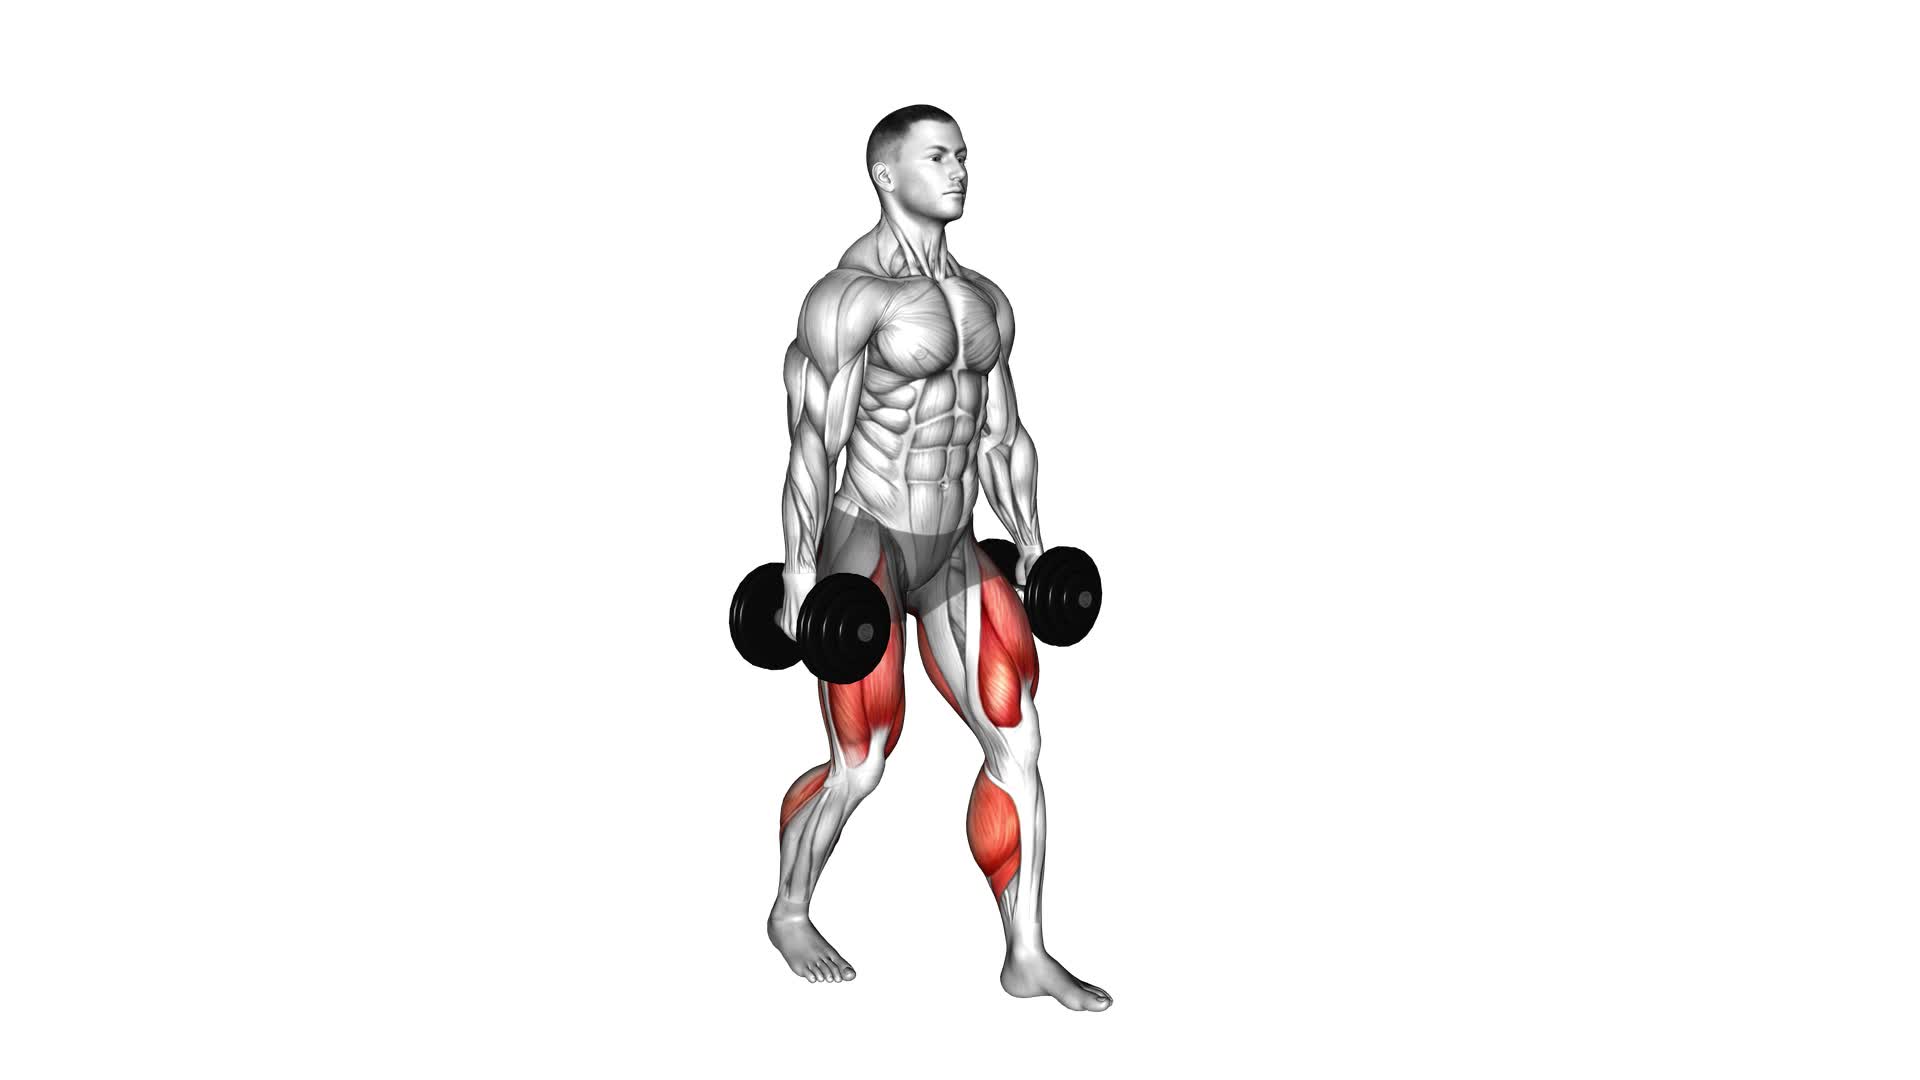 Farmers Walk - Video Exercise Guide & Tips